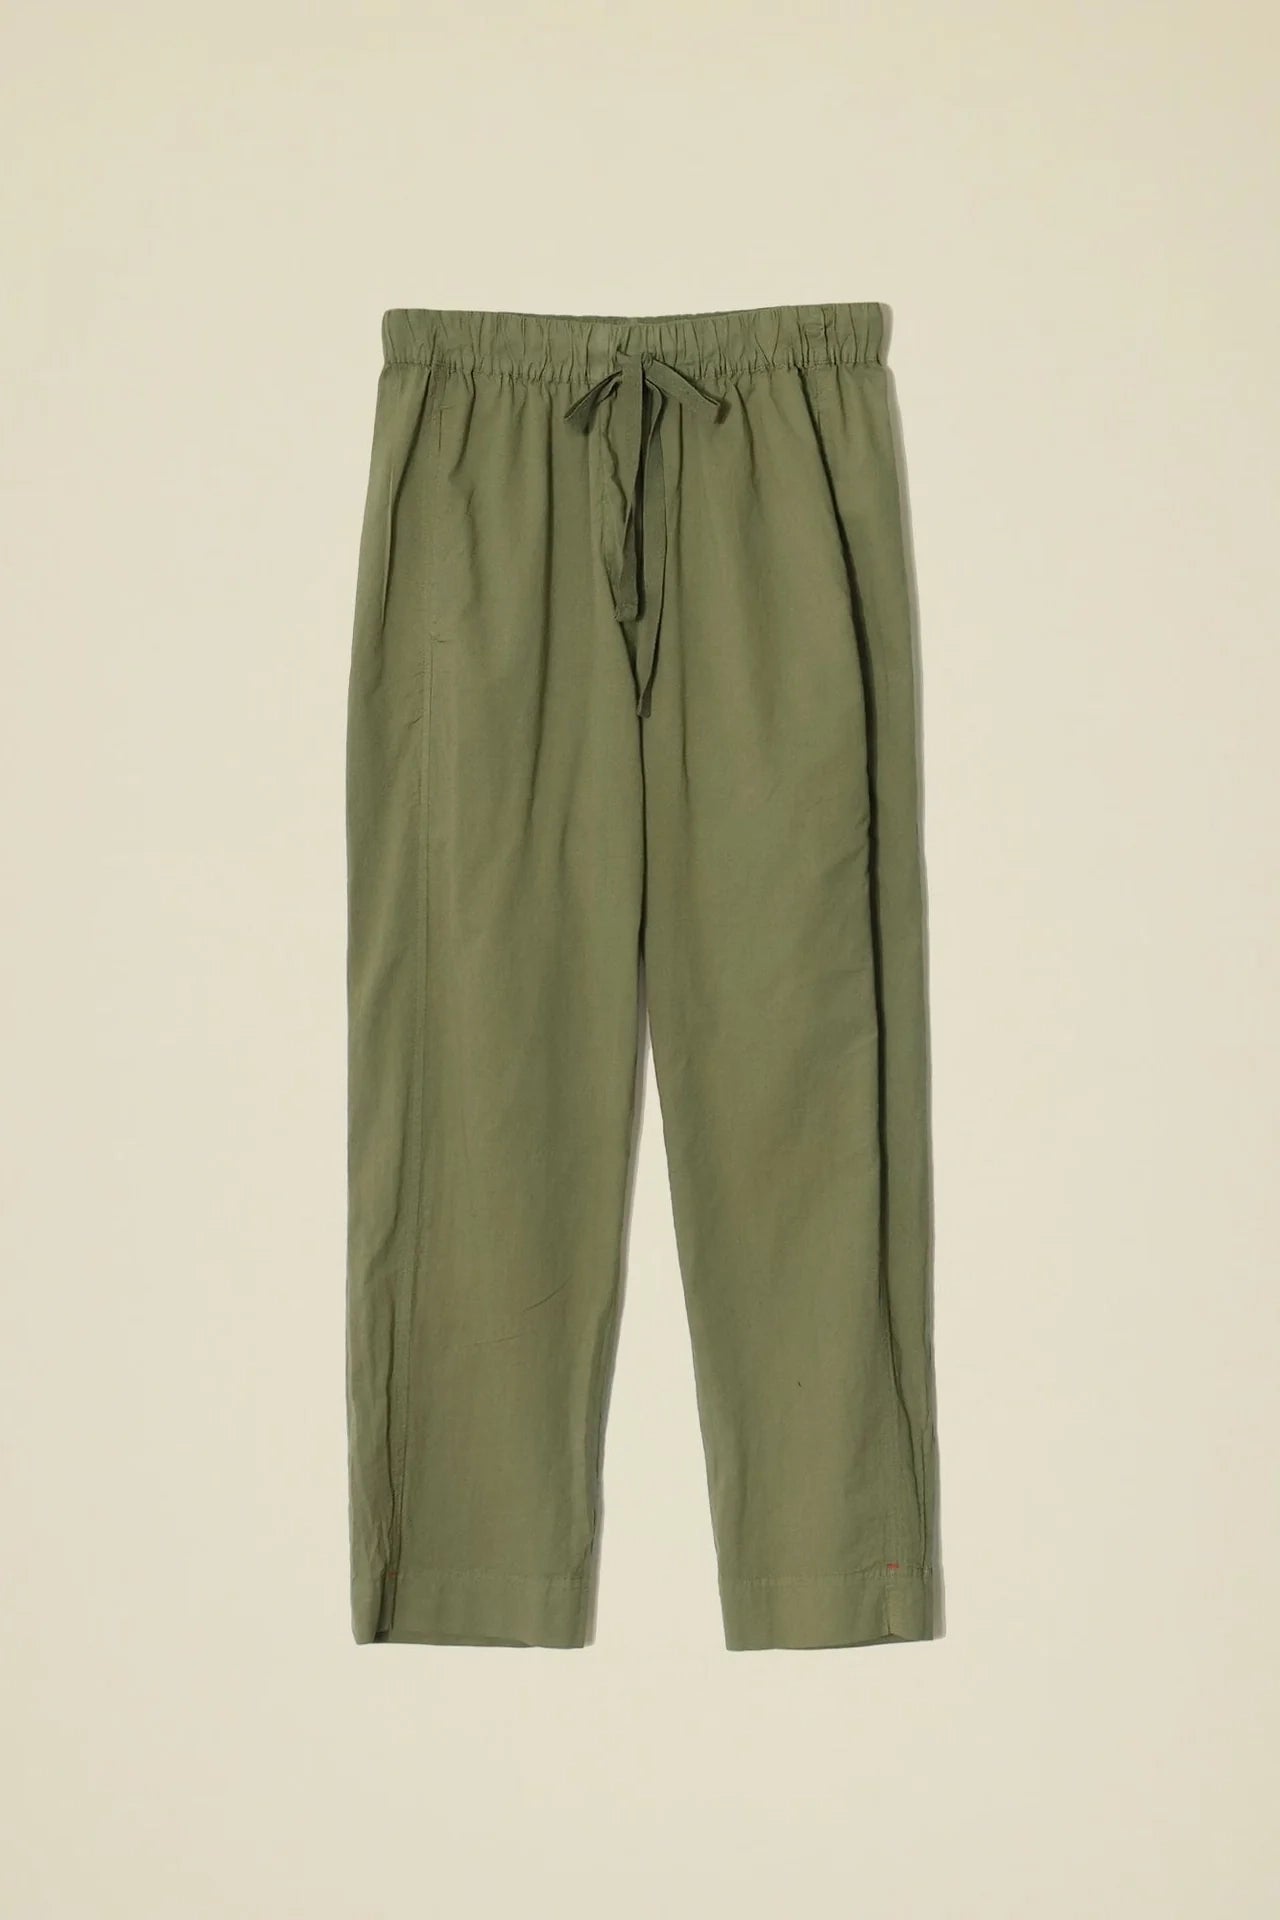 XIRENA Draper Pant - Bay Leaf – shopthecollector